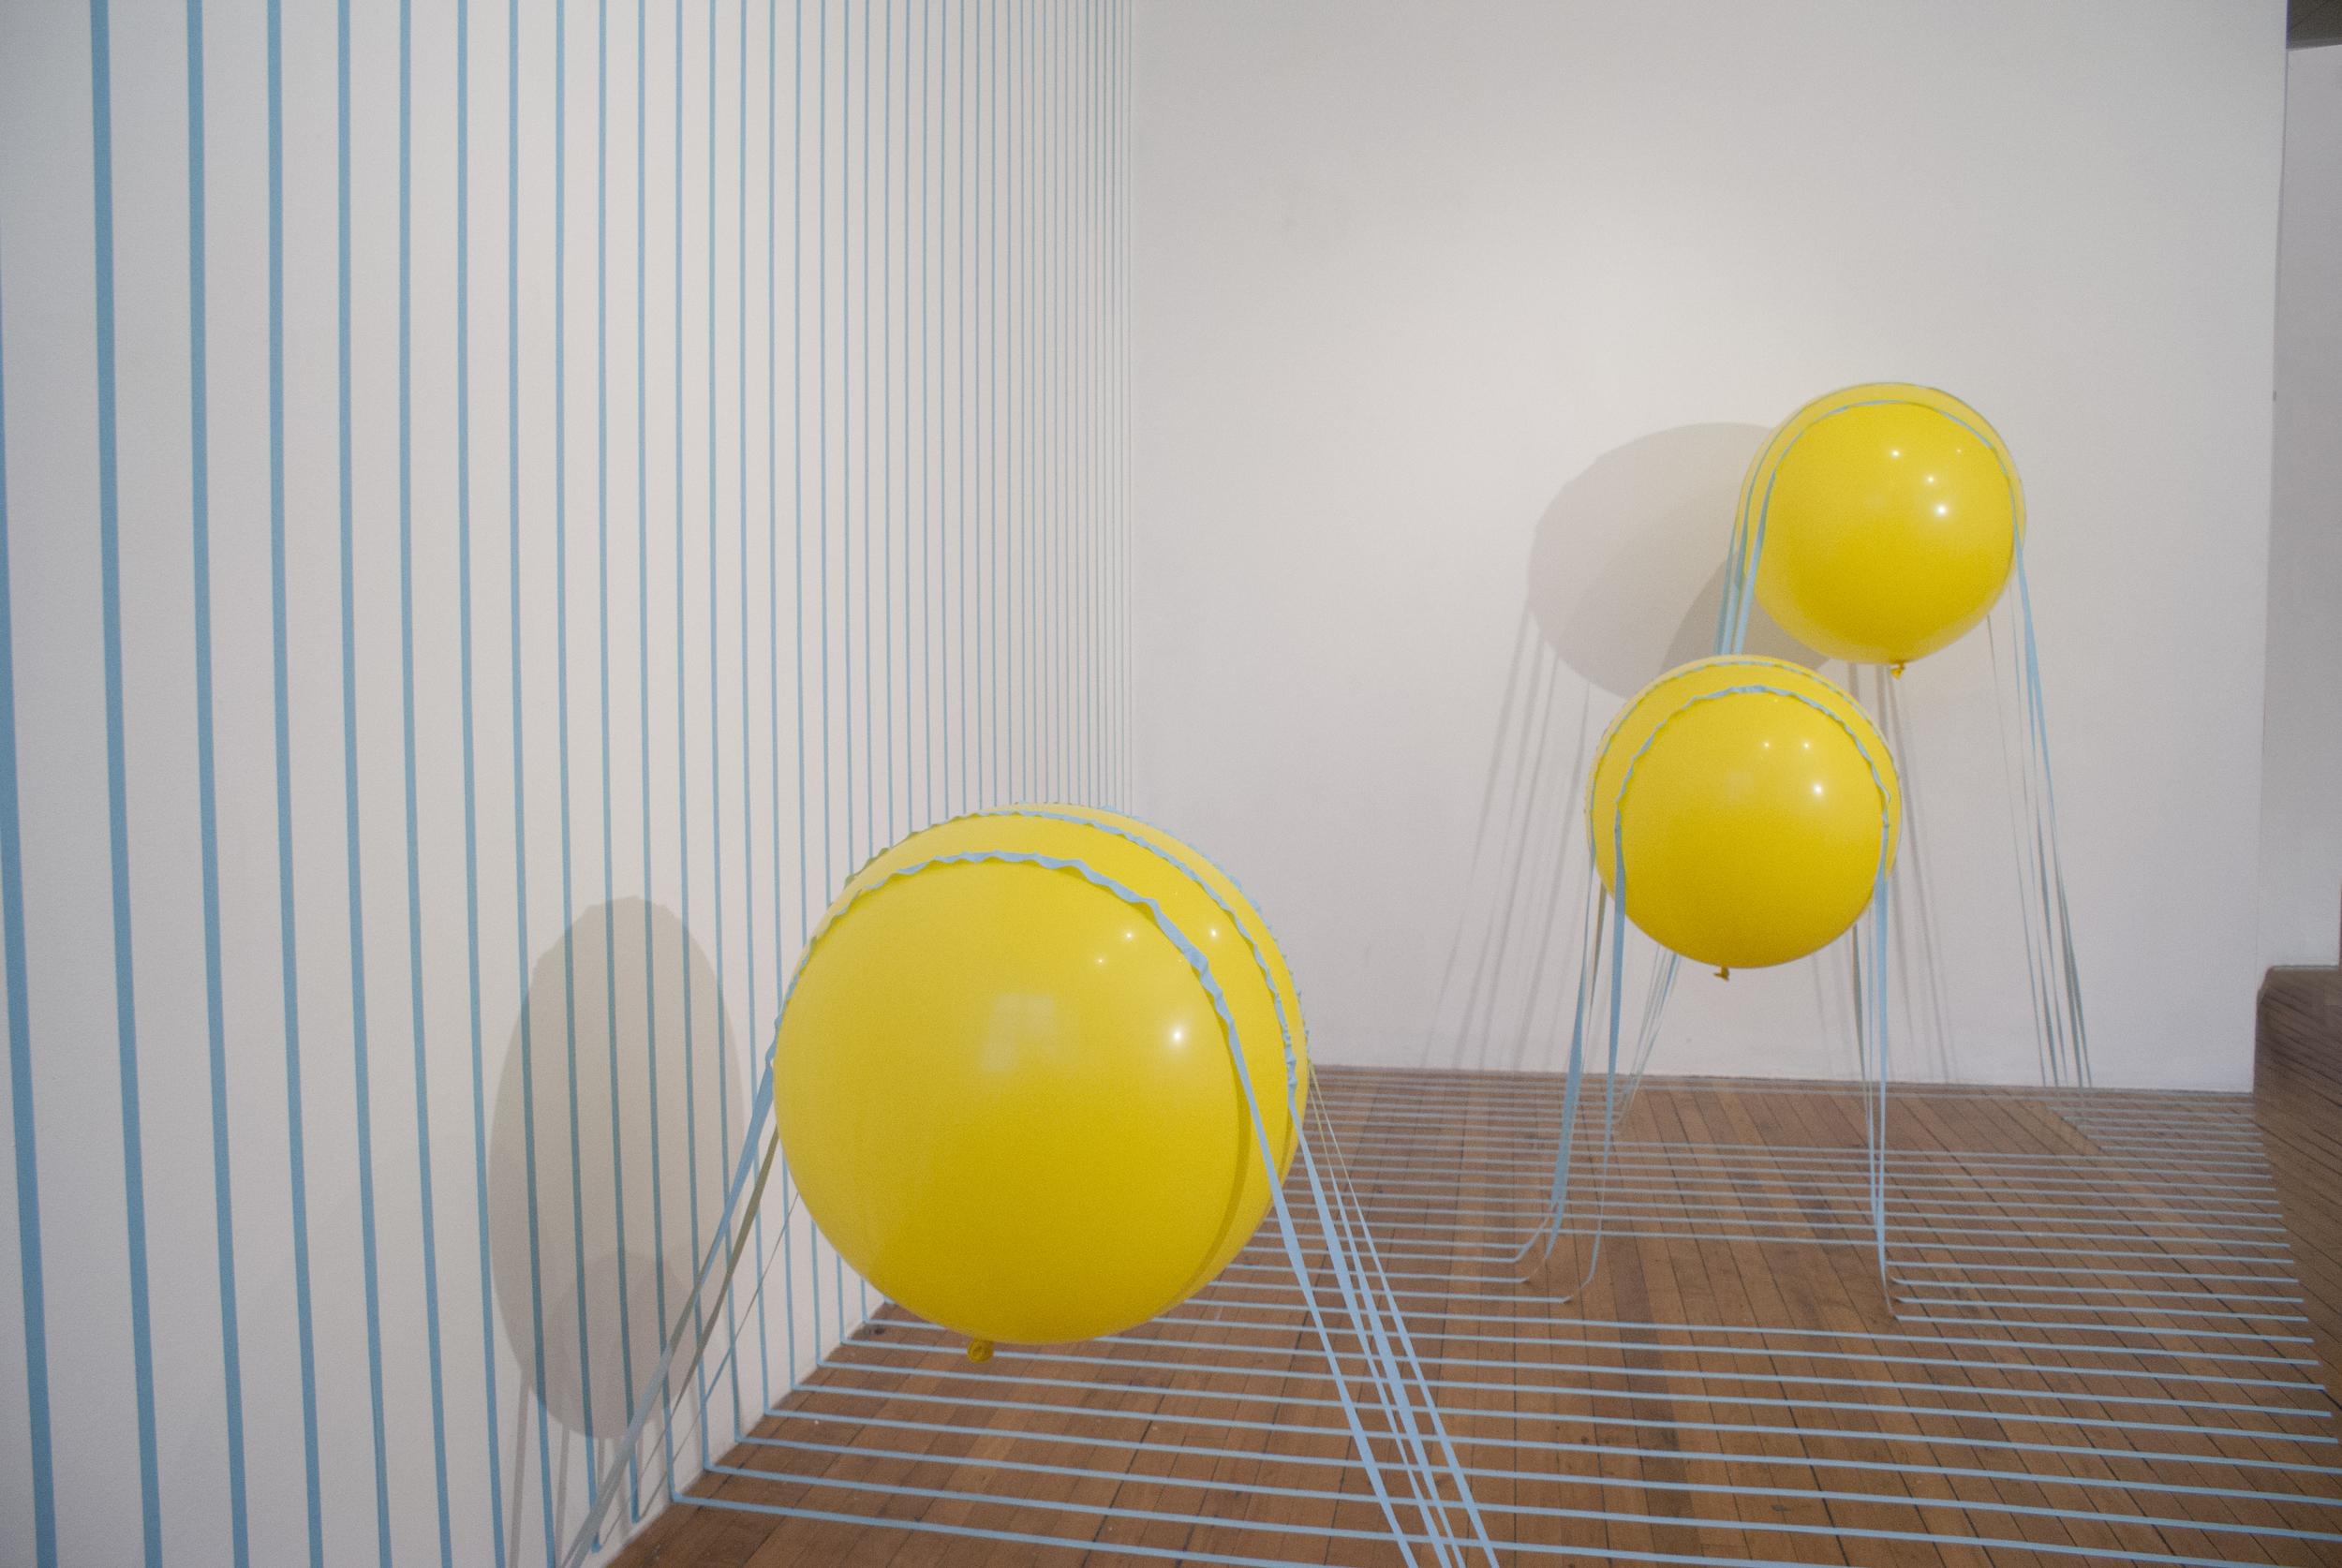   Buoyant Loss   2014  artist tape, balloon, and helium  120”x180”x120” 